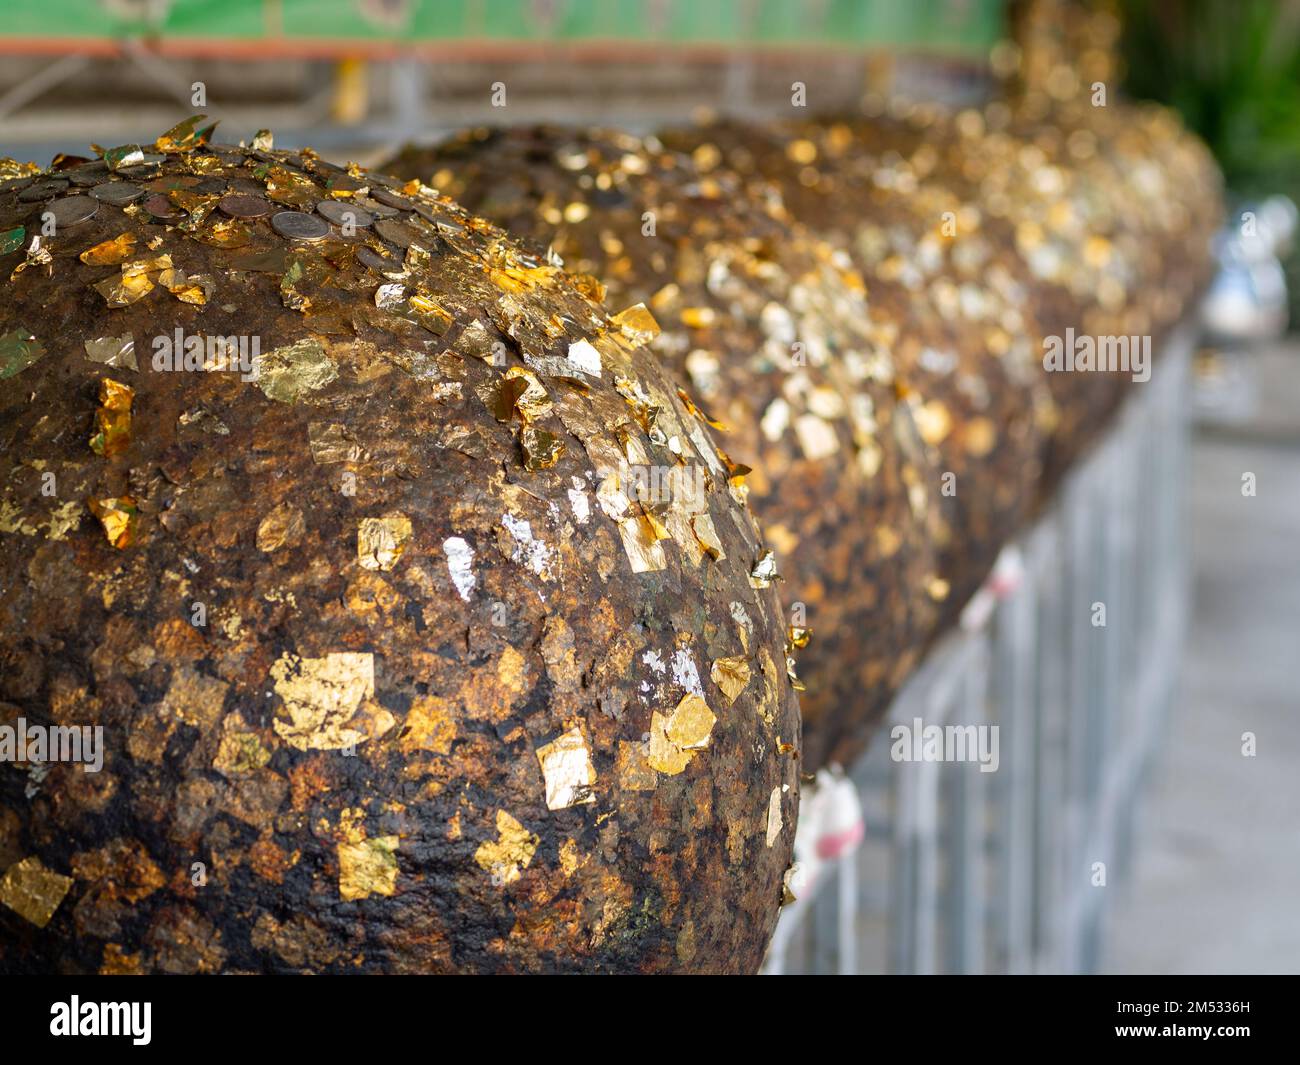 The ball of visions attached to the gold leaf according to Buddhism Stock Photo